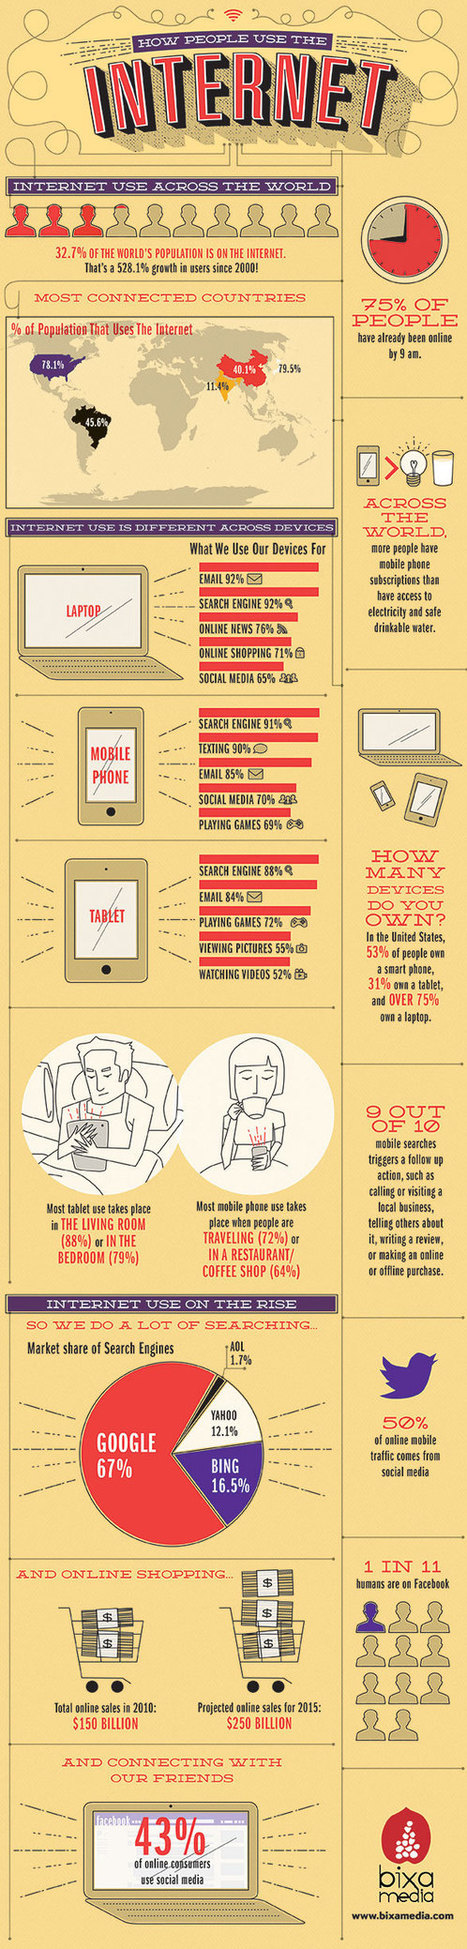 How People Use the Internet [INFOGRAPHIC] | MarketingHits | Scoop.it